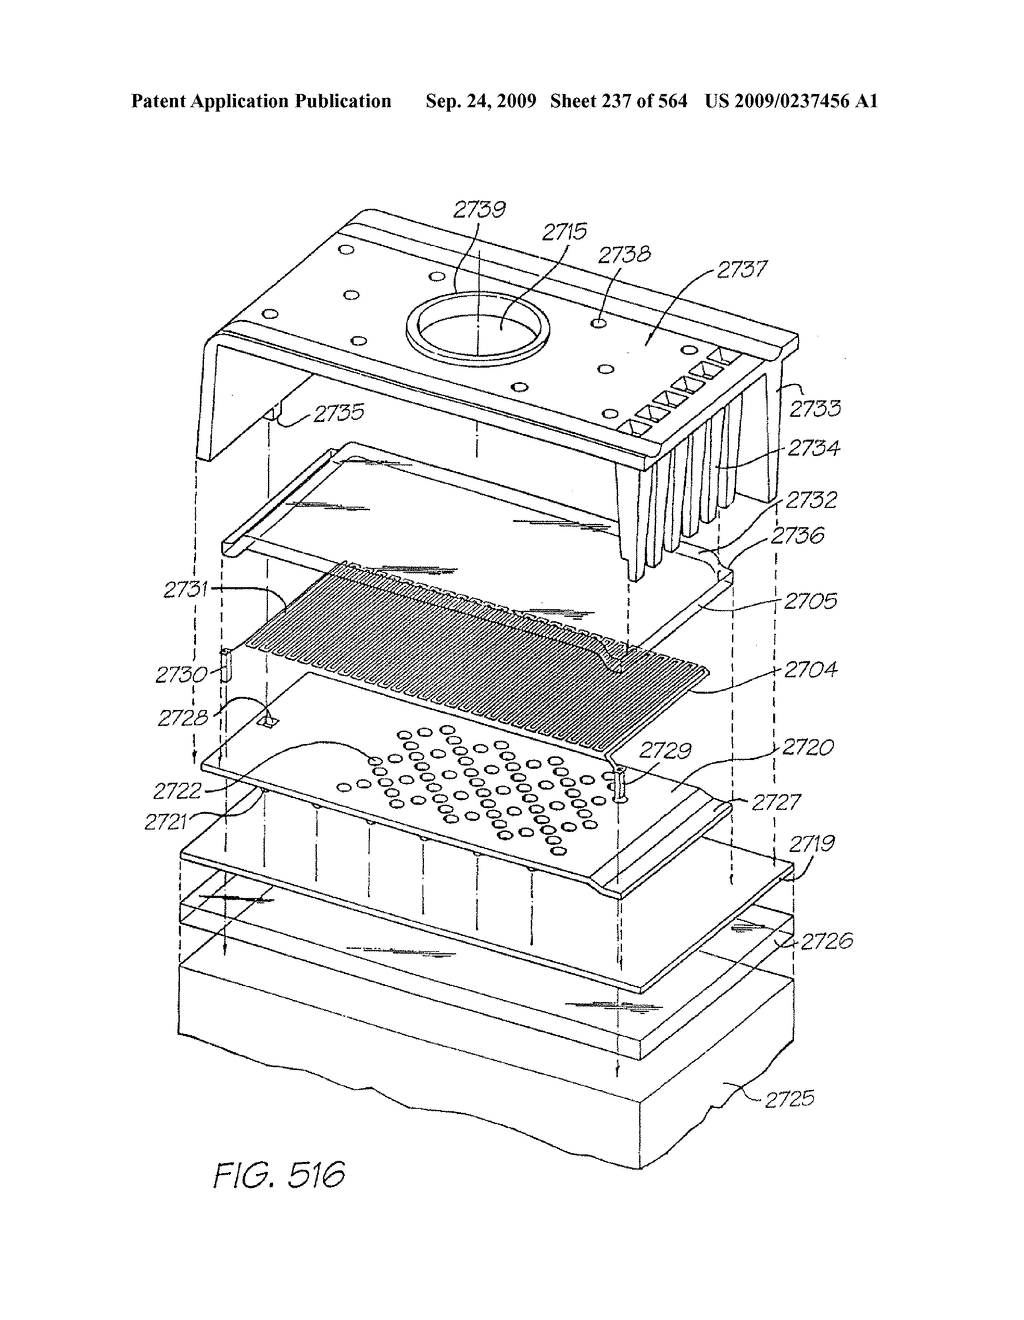 Inkjet Printhead With Paddle For Ejecting Ink From One Of Two Nozzles - diagram, schematic, and image 238